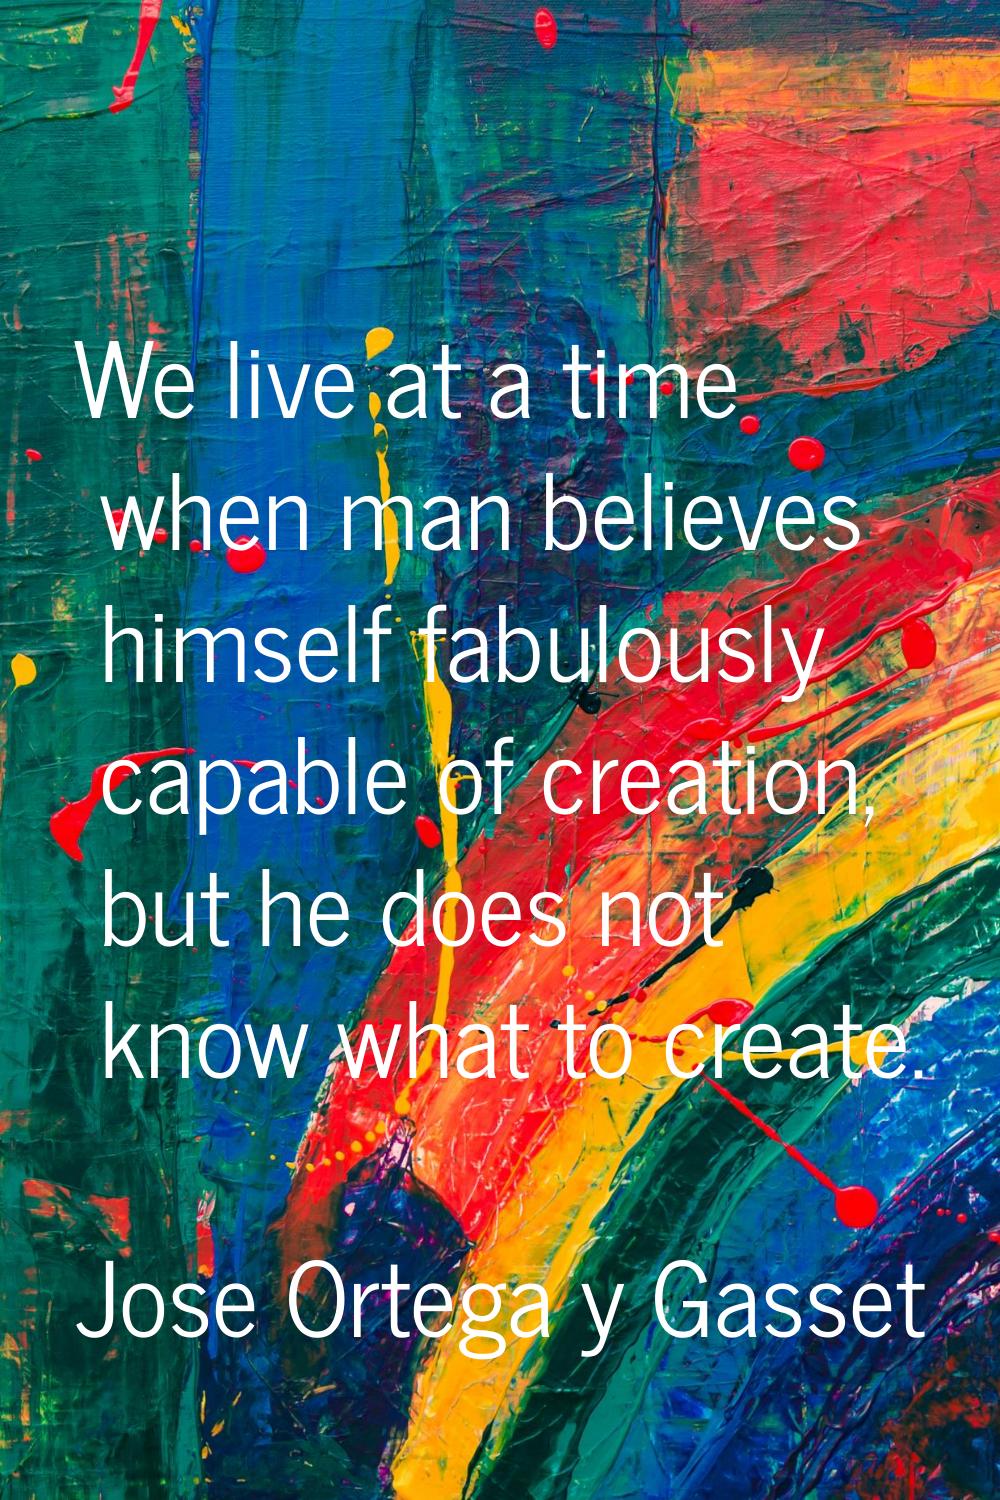 We live at a time when man believes himself fabulously capable of creation, but he does not know wh